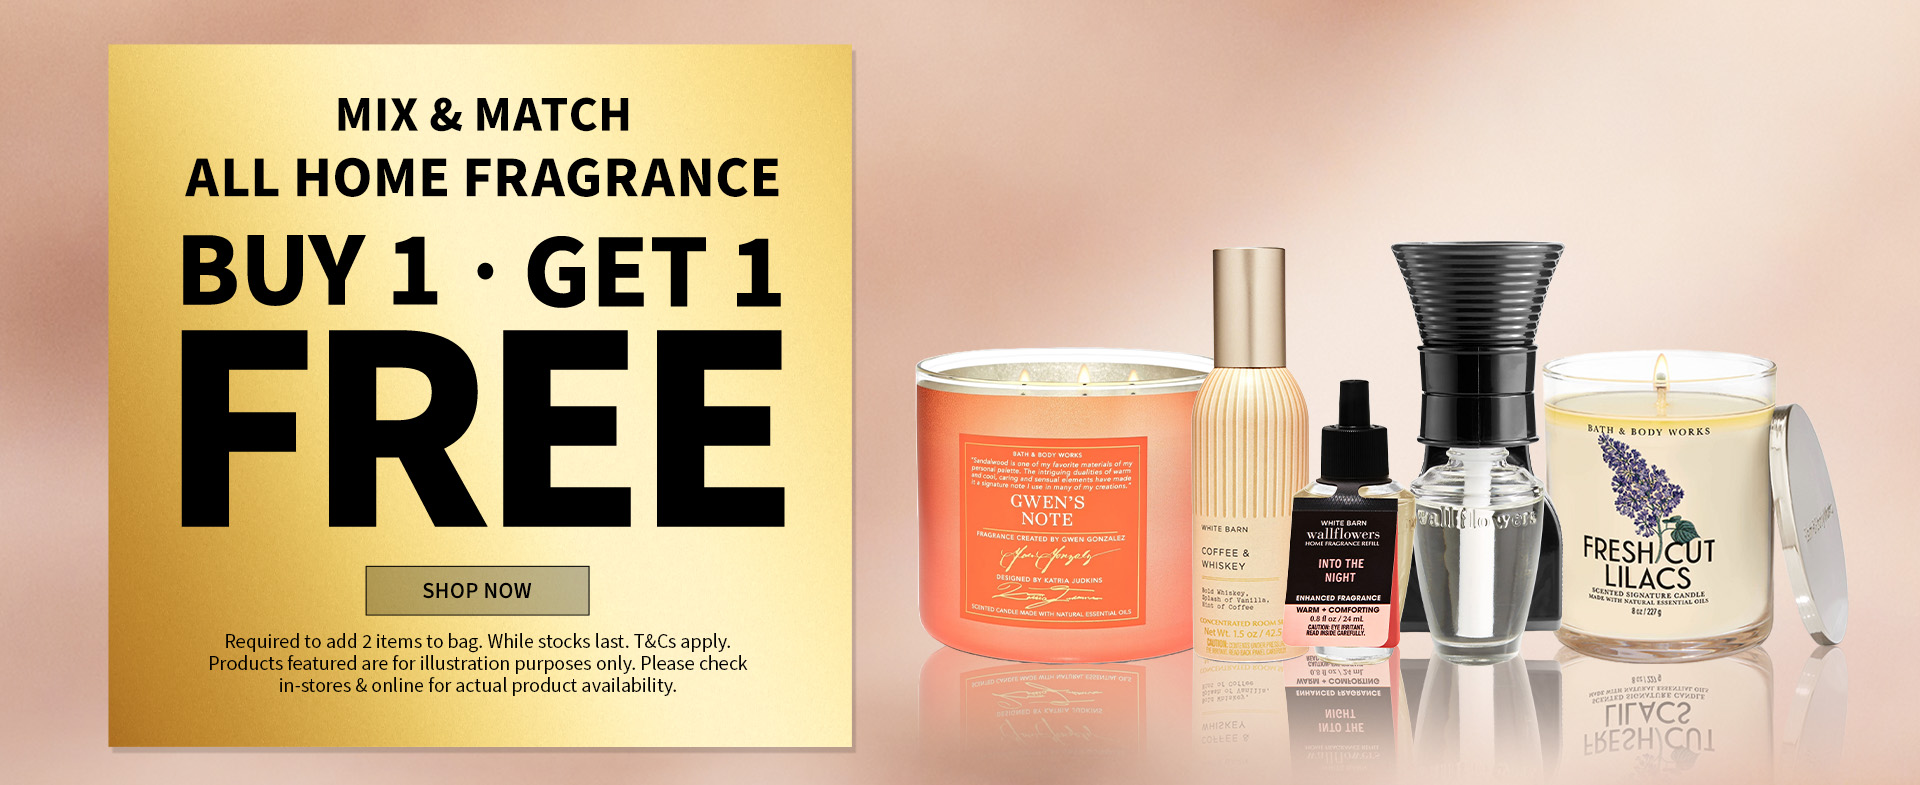 MIX & MATCH ALL HOME FRAGRANCE BUY 1, GET 1 FREE